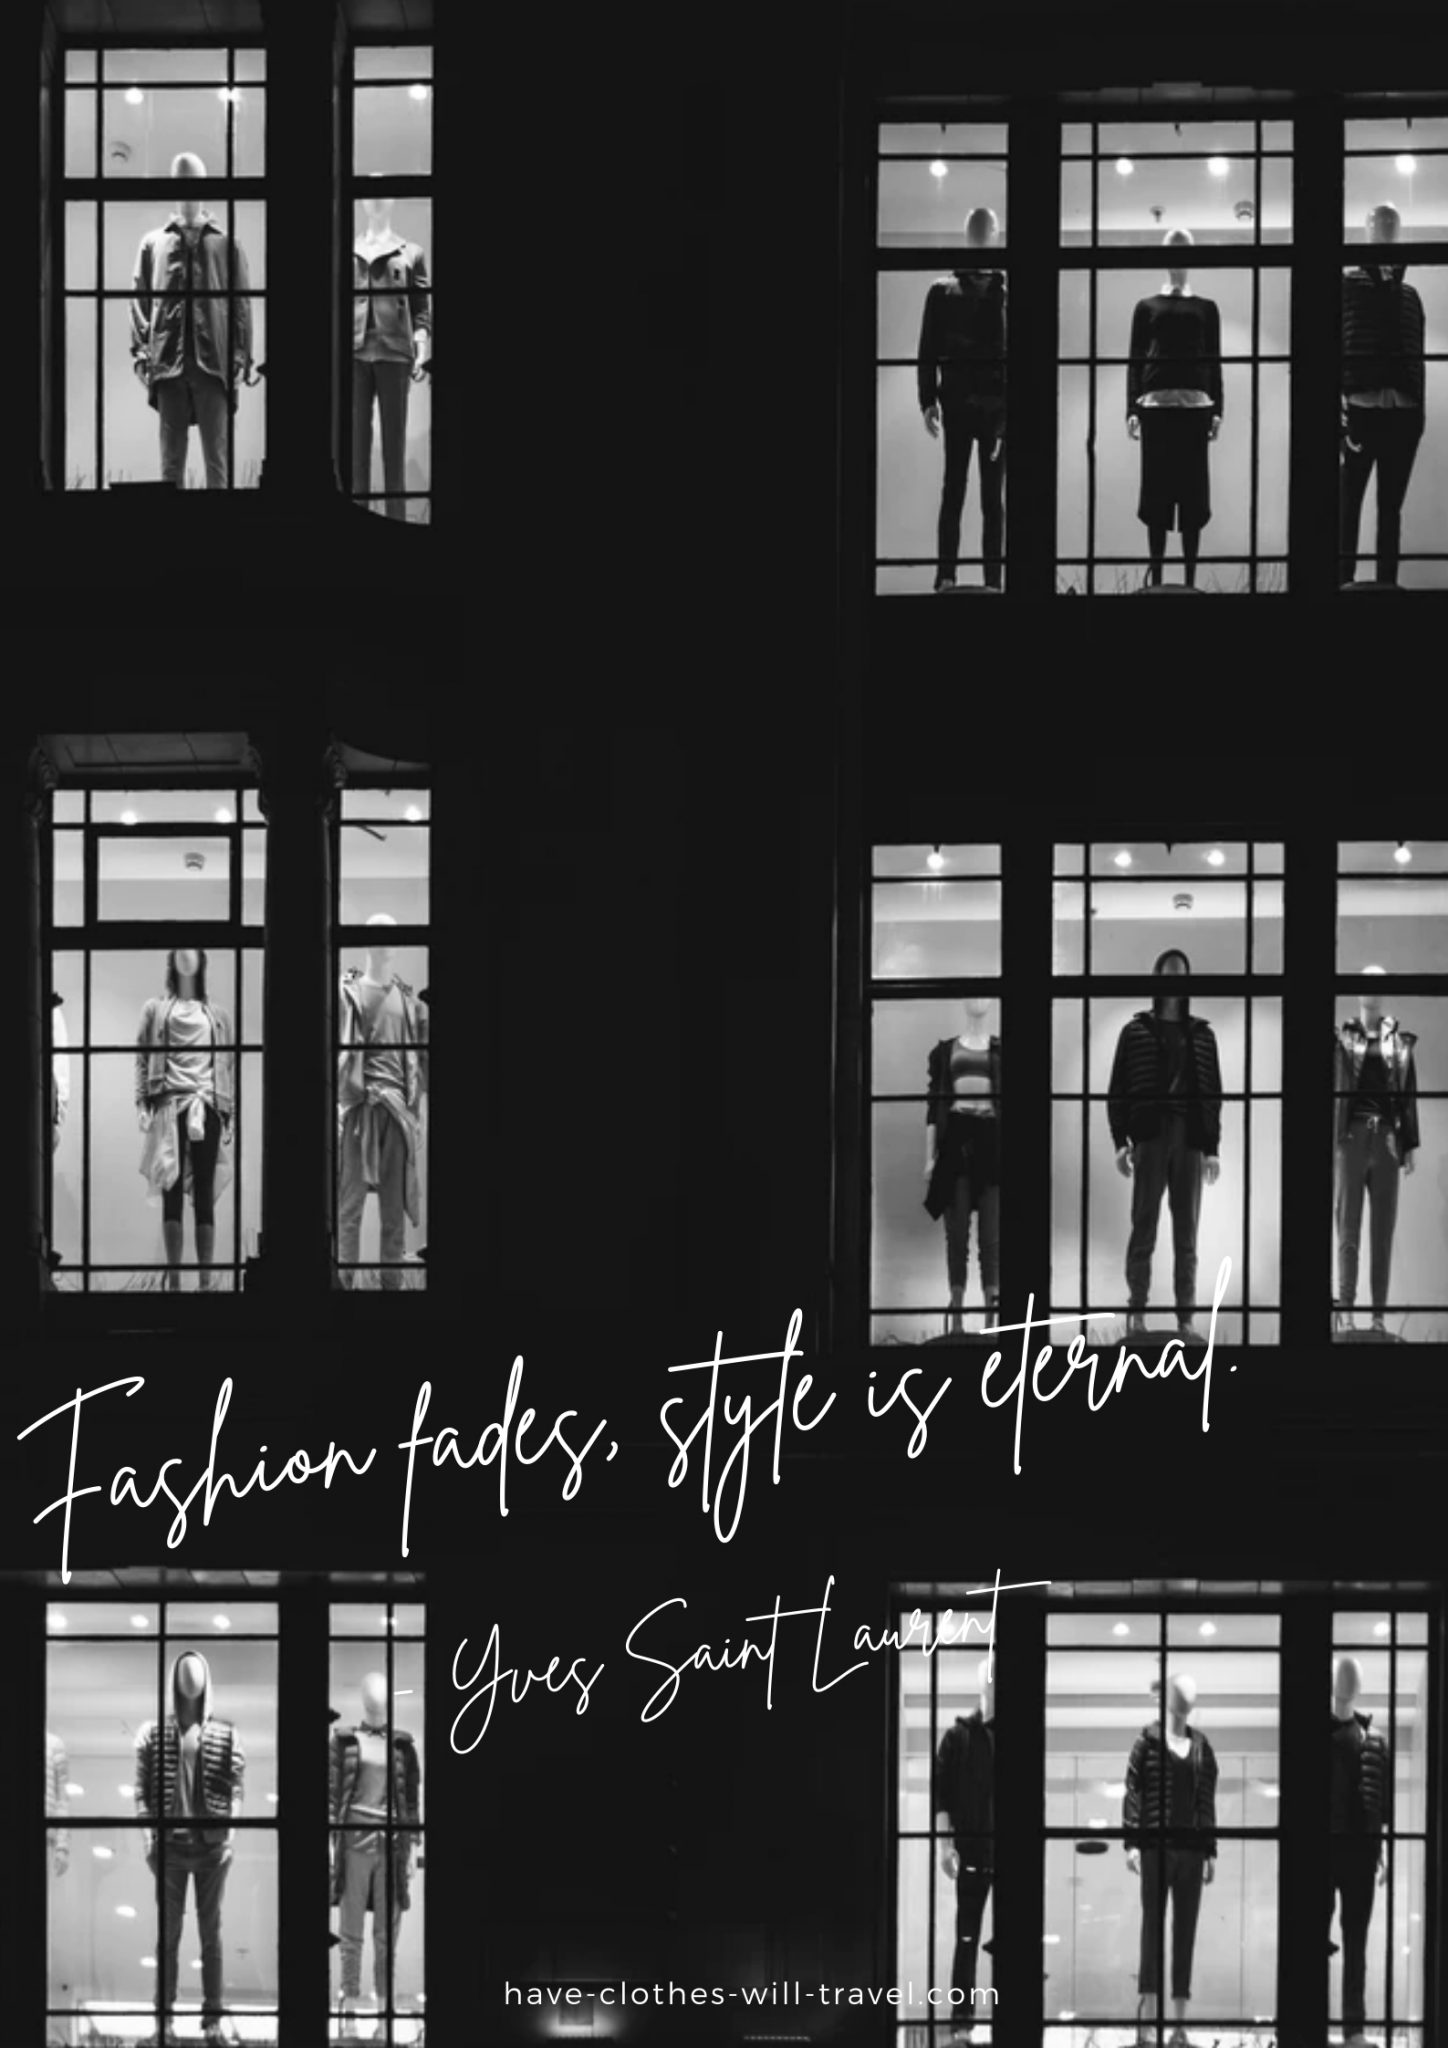 A black and white image of mannequin figures in the windows of a multi-story building. White cursive text across the image says, "Fashion changes, but style endures. ― Coco Chanel"